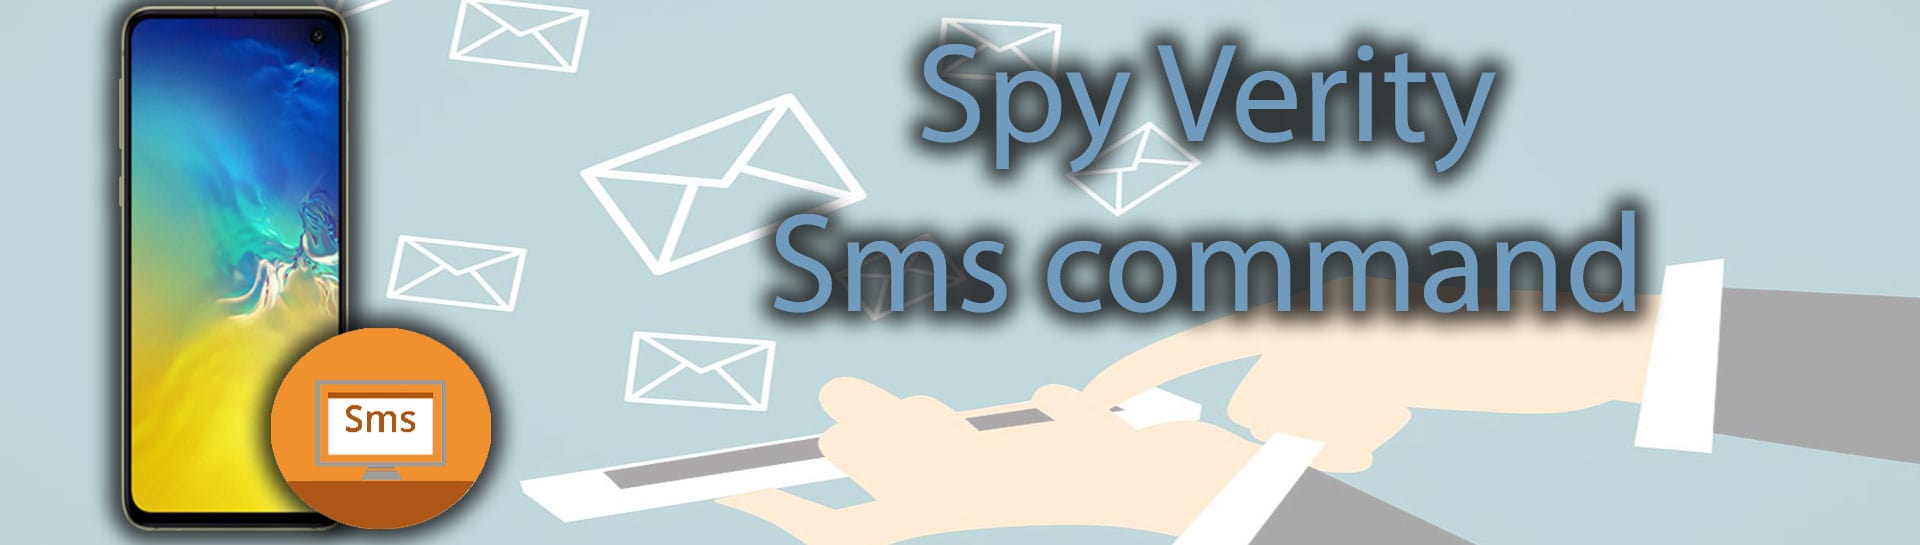 spyphone sms command